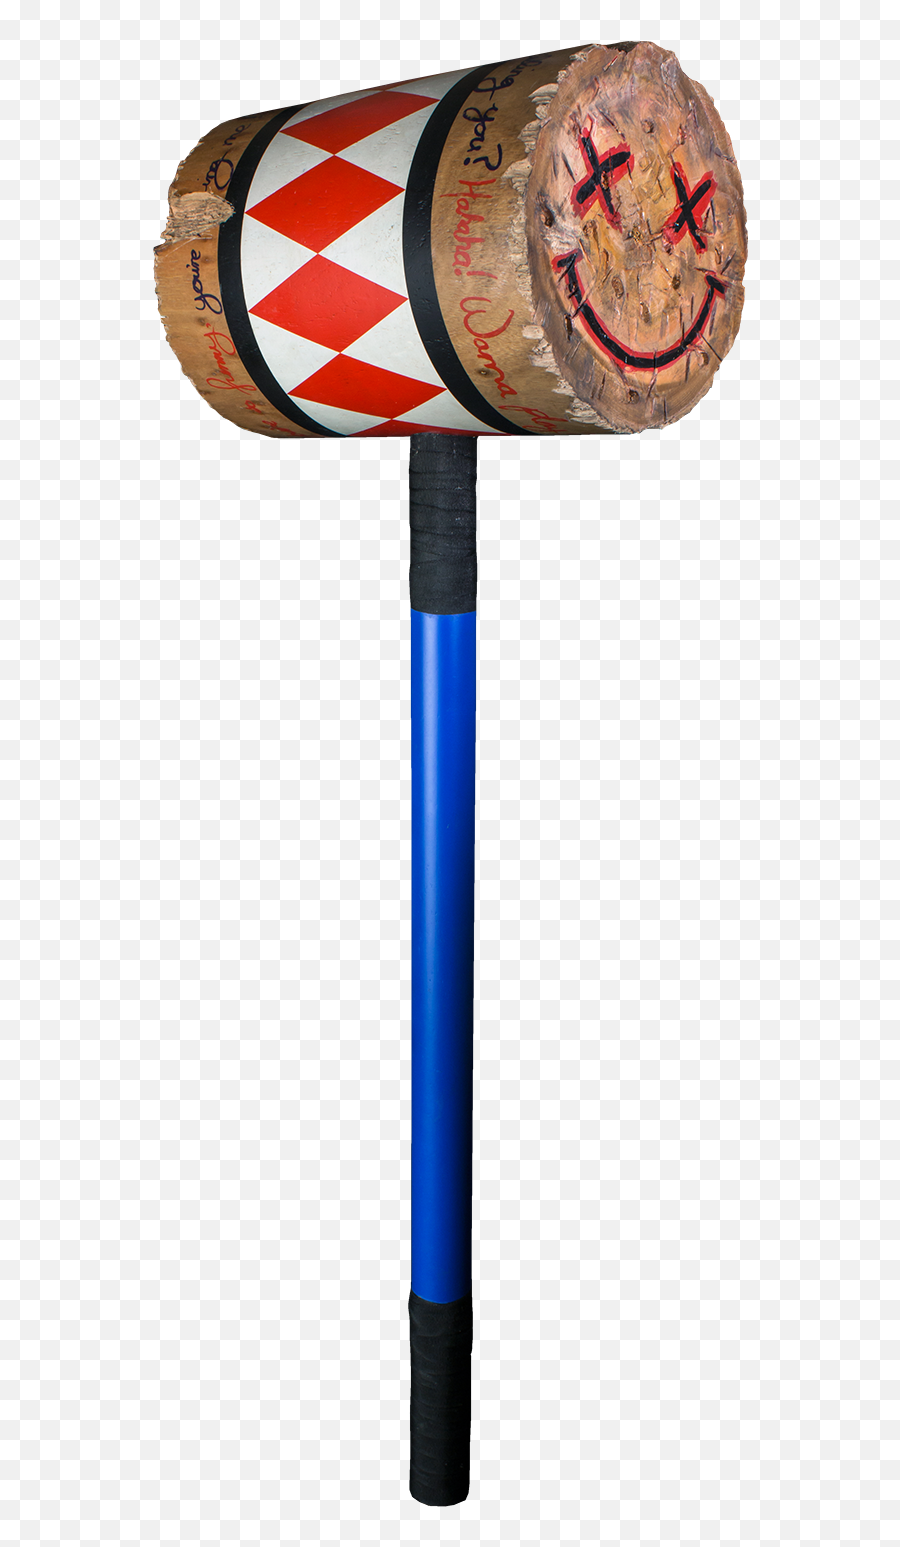 Download Harley Quinn Wooden Mallet Replica - Harley Quinn Harley Quinn Hammer Suicide Squad Png,Mallet Png